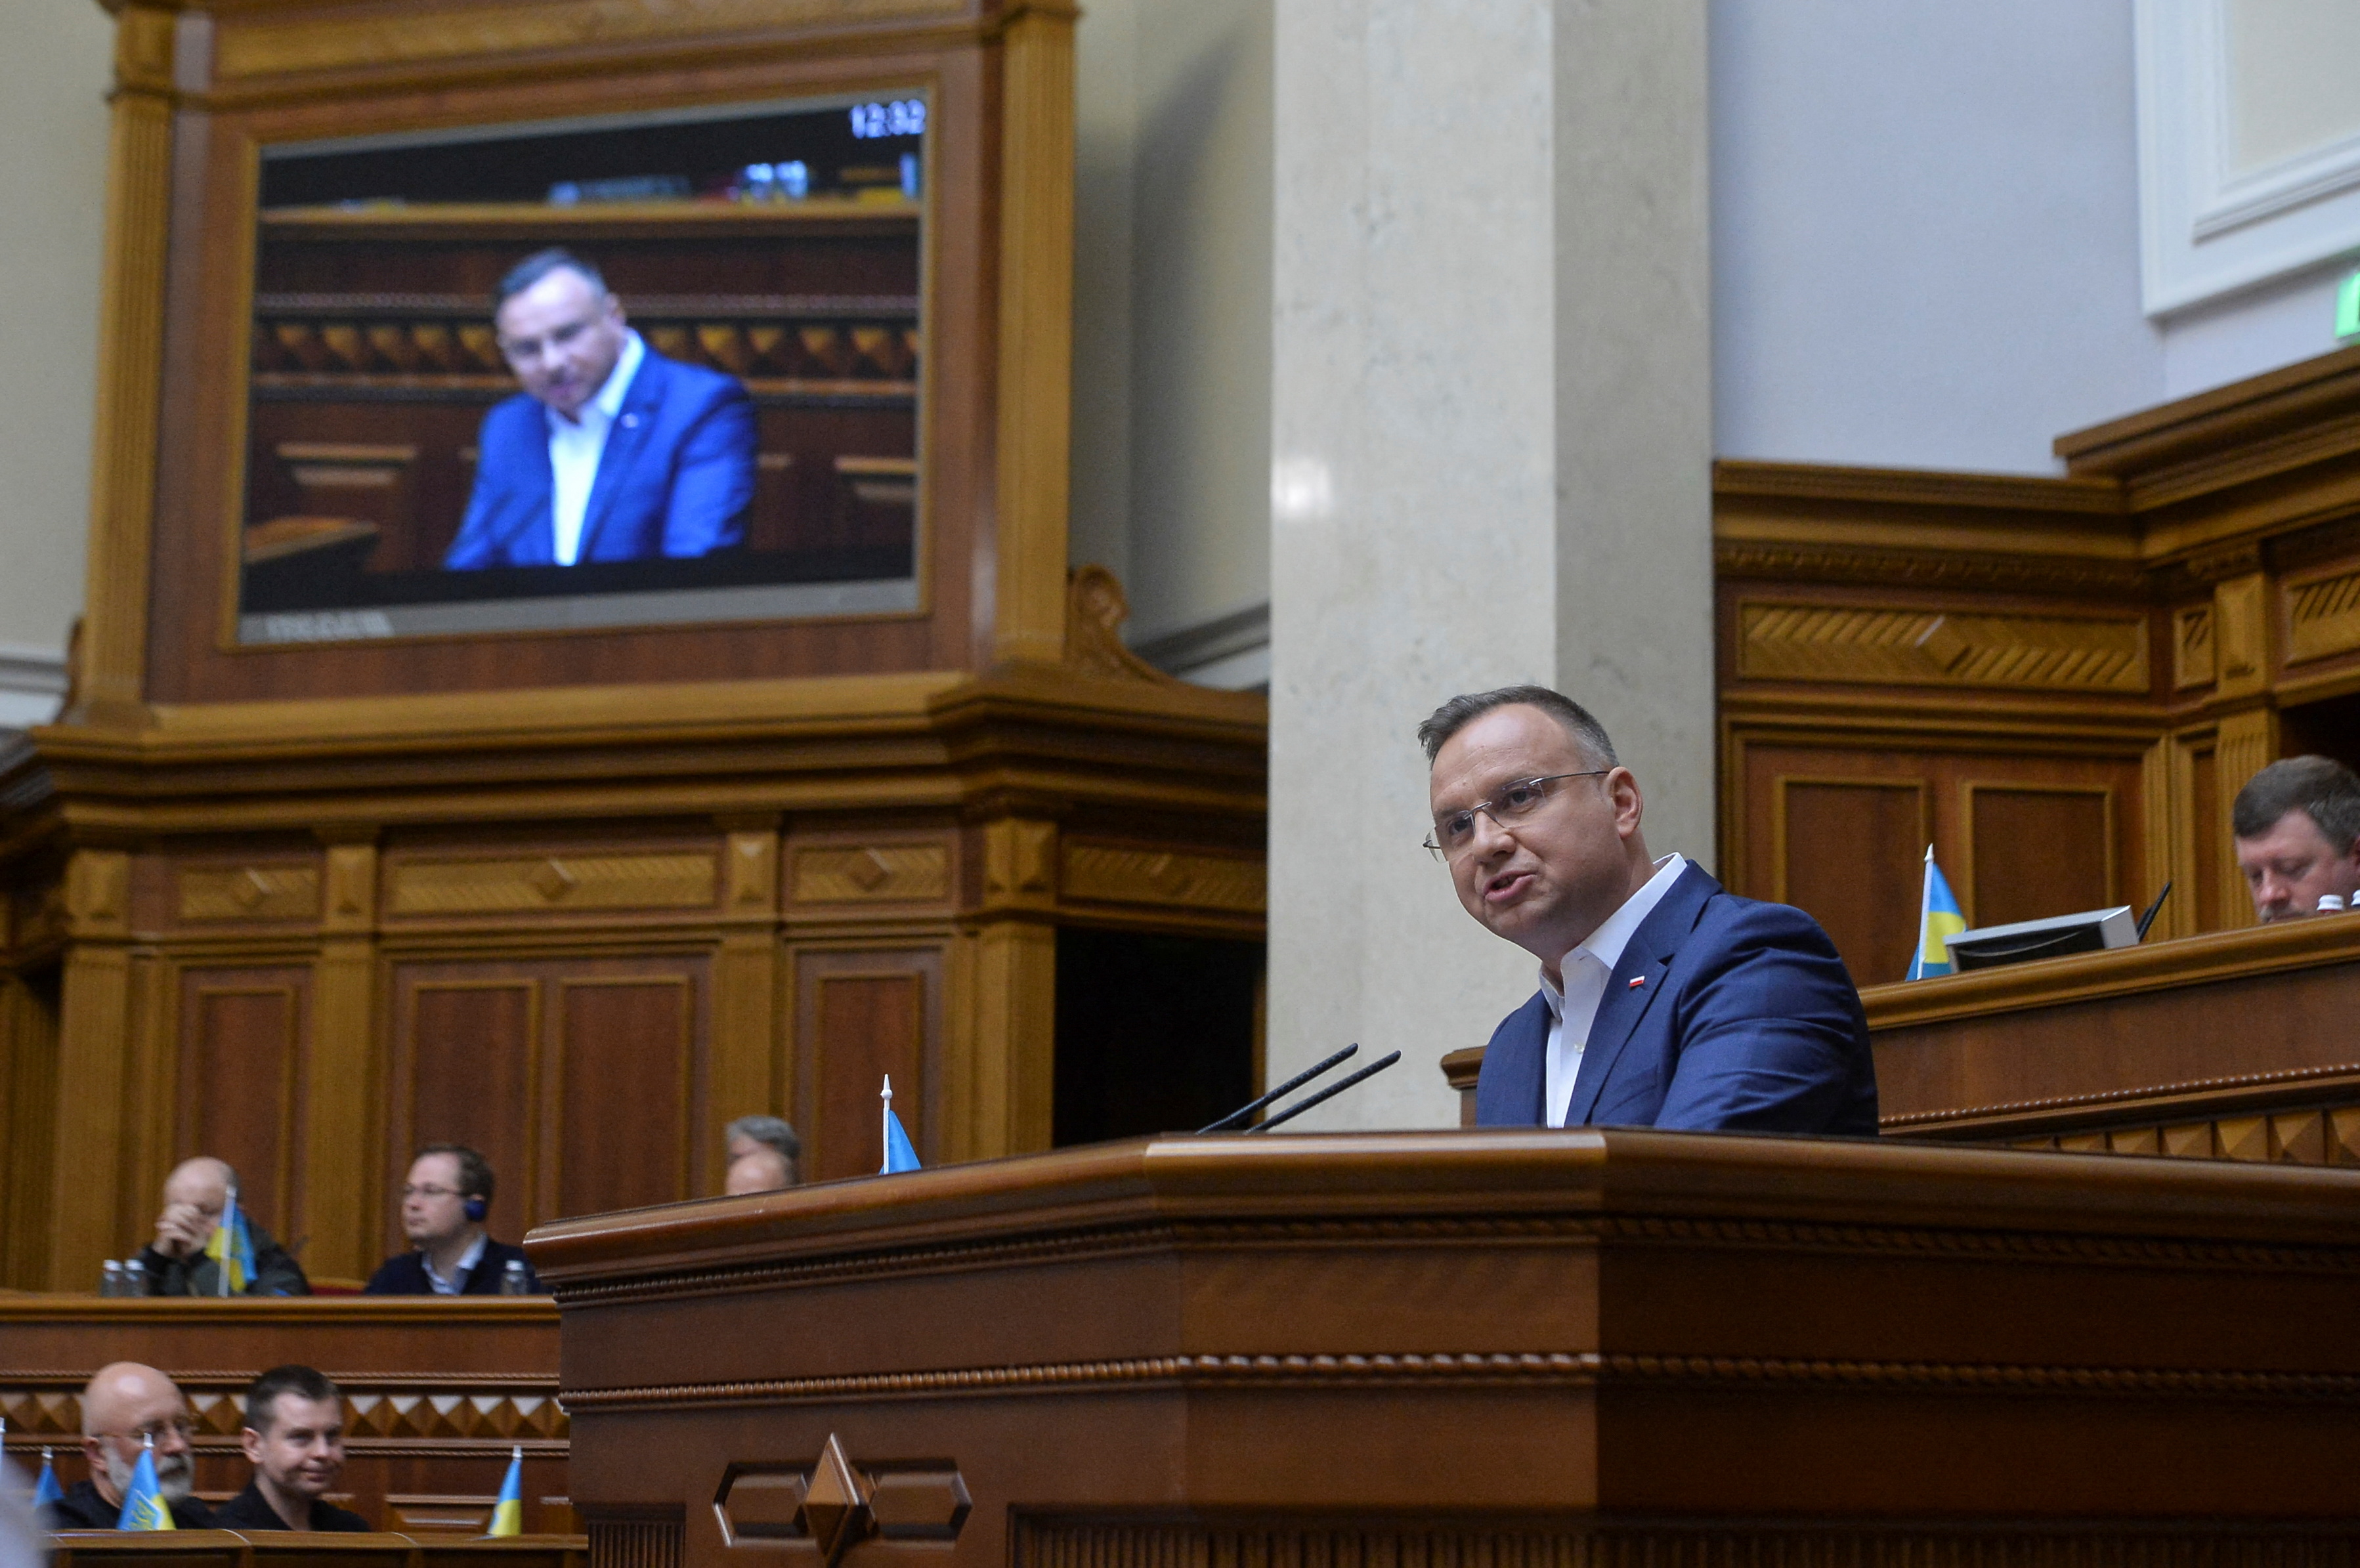 Polish President Duda attends a session of Ukrainian parliament in Kyiv